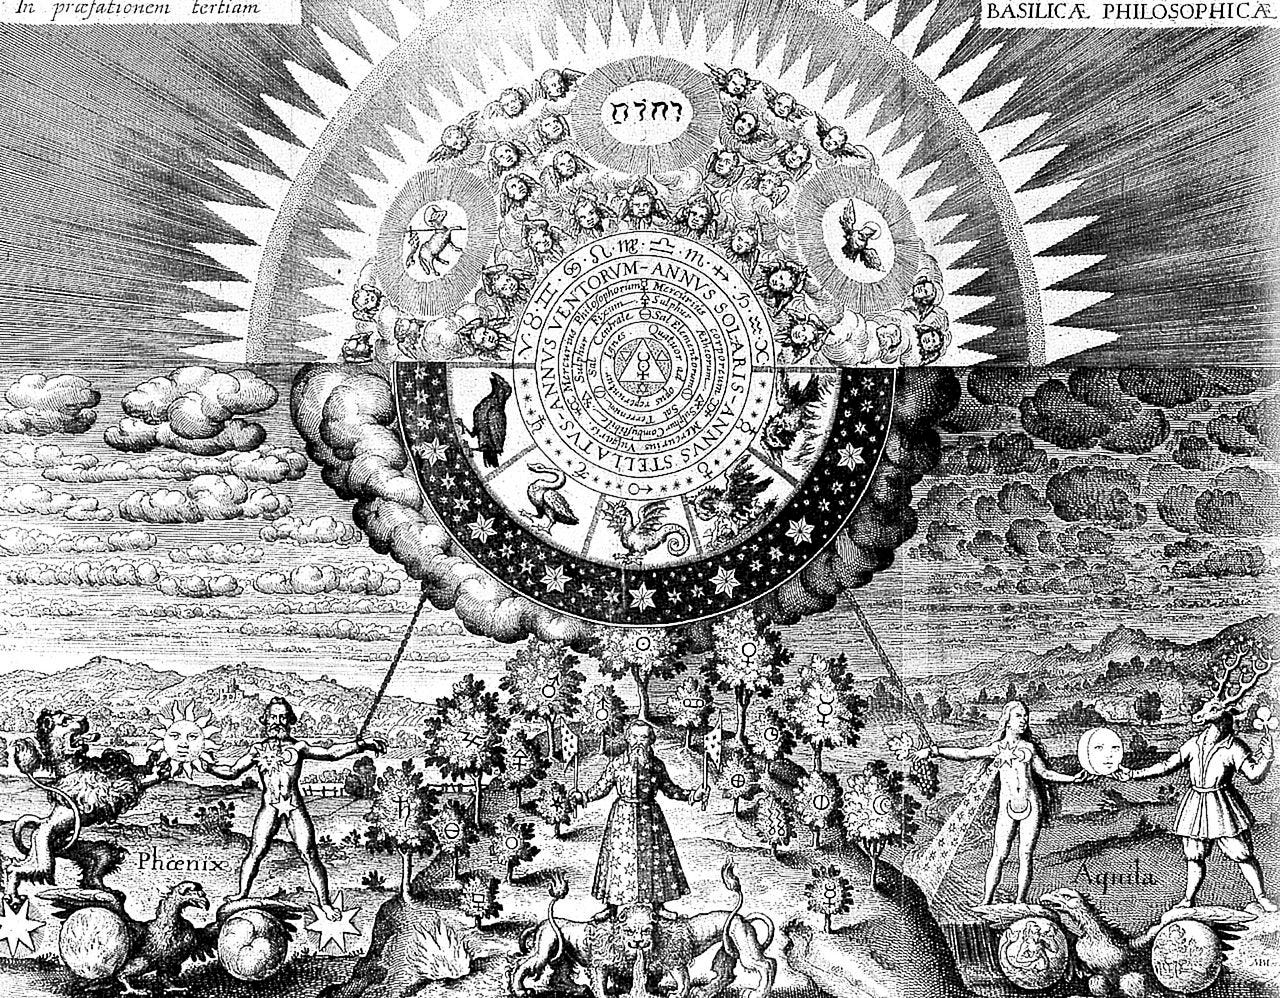 Alchemical illustration in the "Basilica Philosophica" section of Opus Medico-Chymicum, page 273